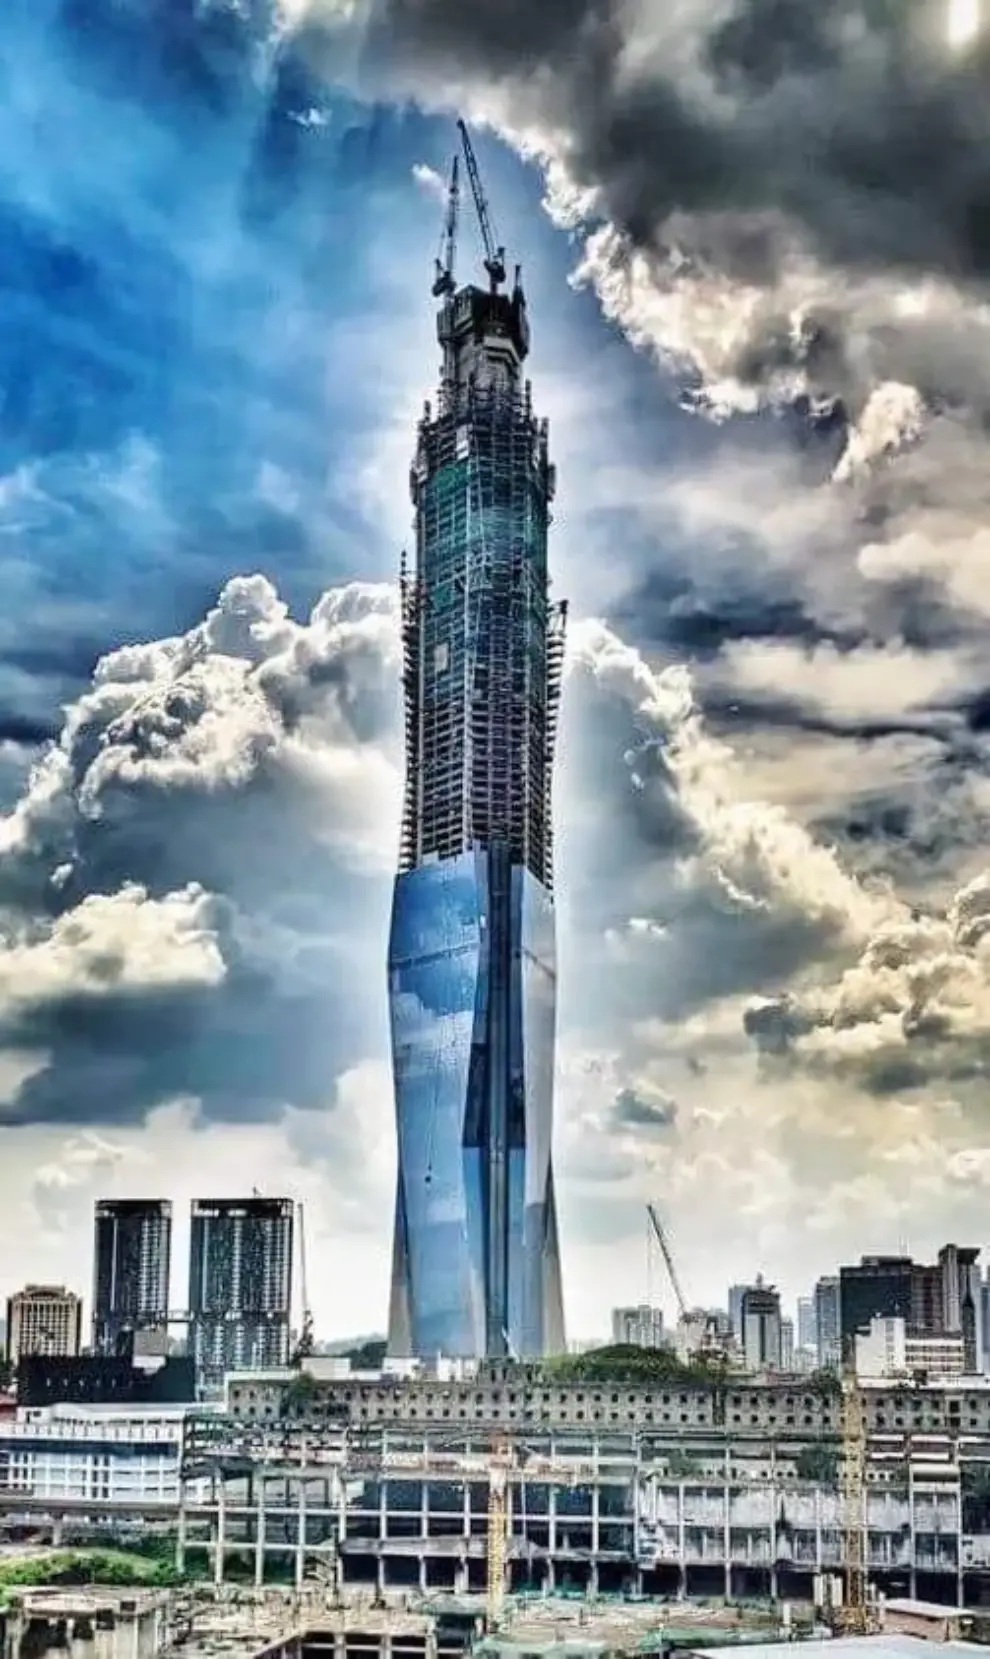 BauGrid® Reinforcement  Enables the World’s Second Tallest Building to Soar into the Skies of Kuala Lumpur